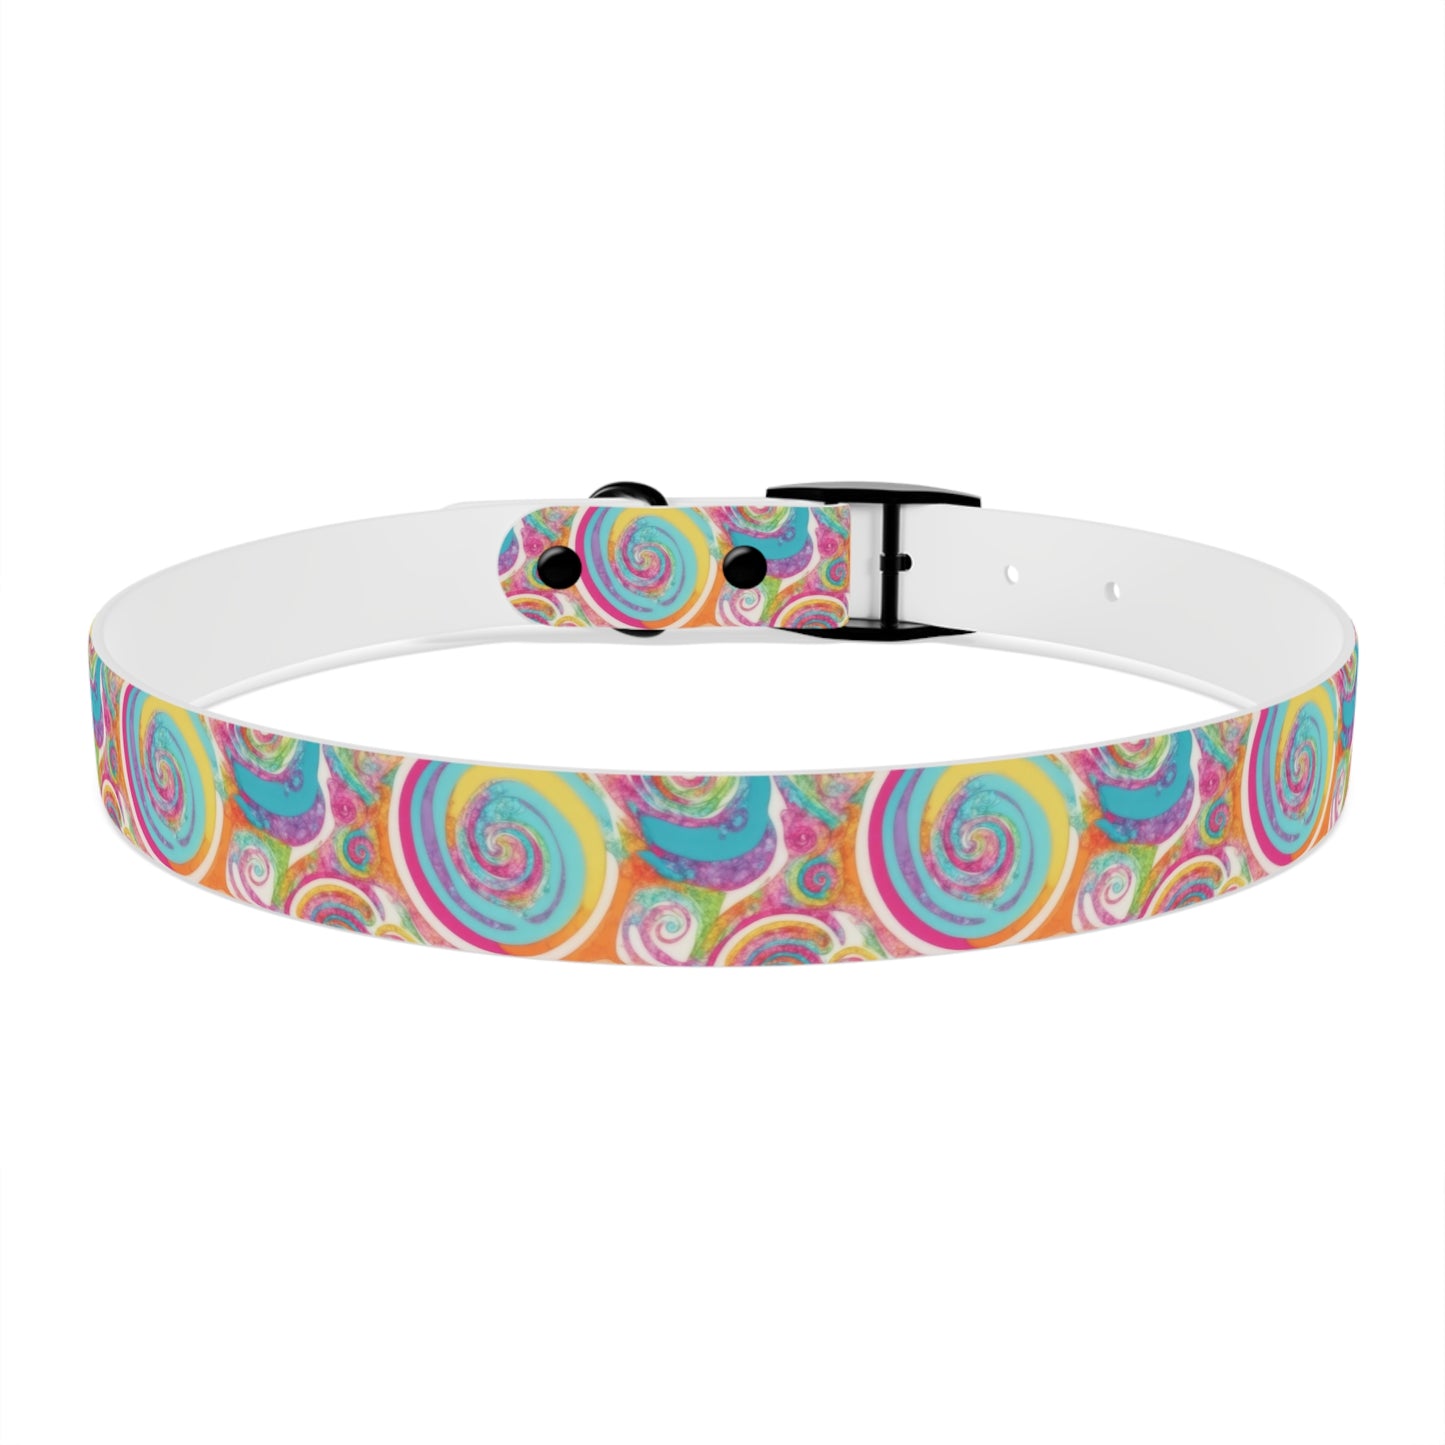 Bright & Colorful Lollypop Swirls Watercolor Pattern Dog Collar